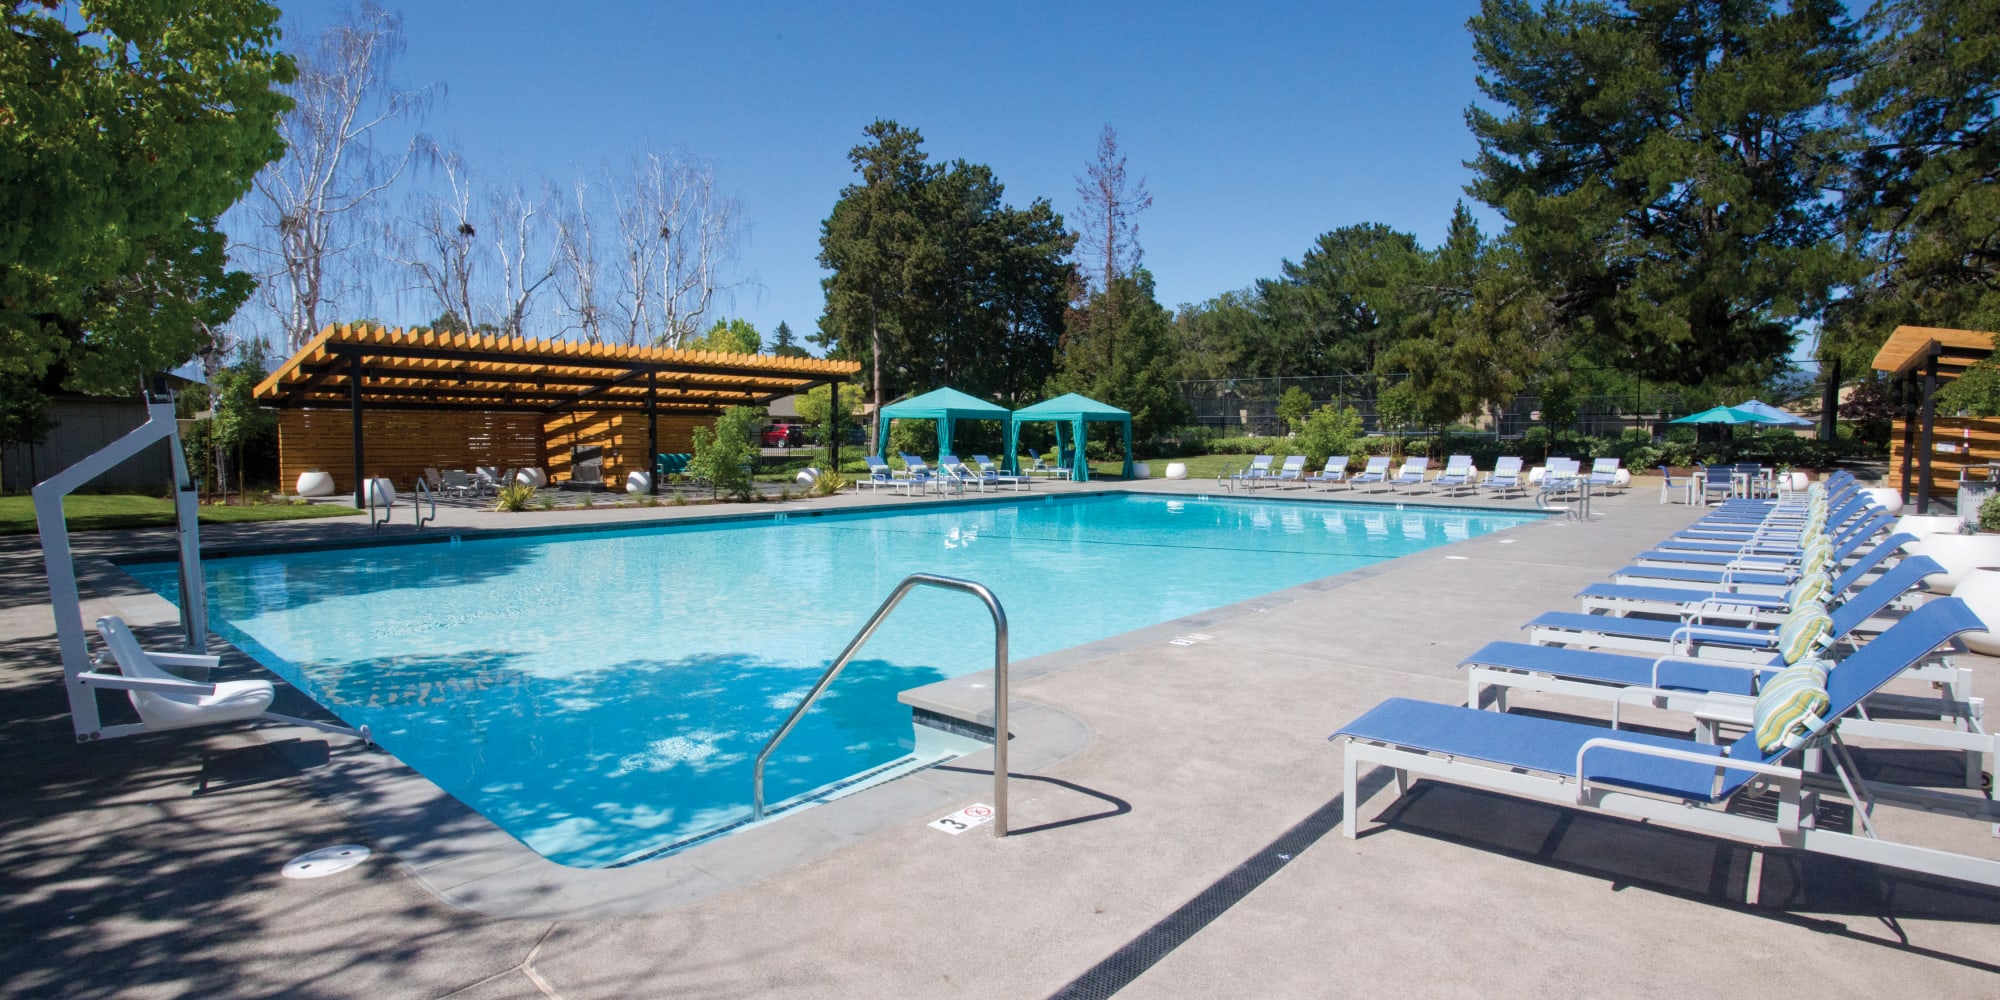 Pool area at The Villages at Cupertino in Cupertino, California